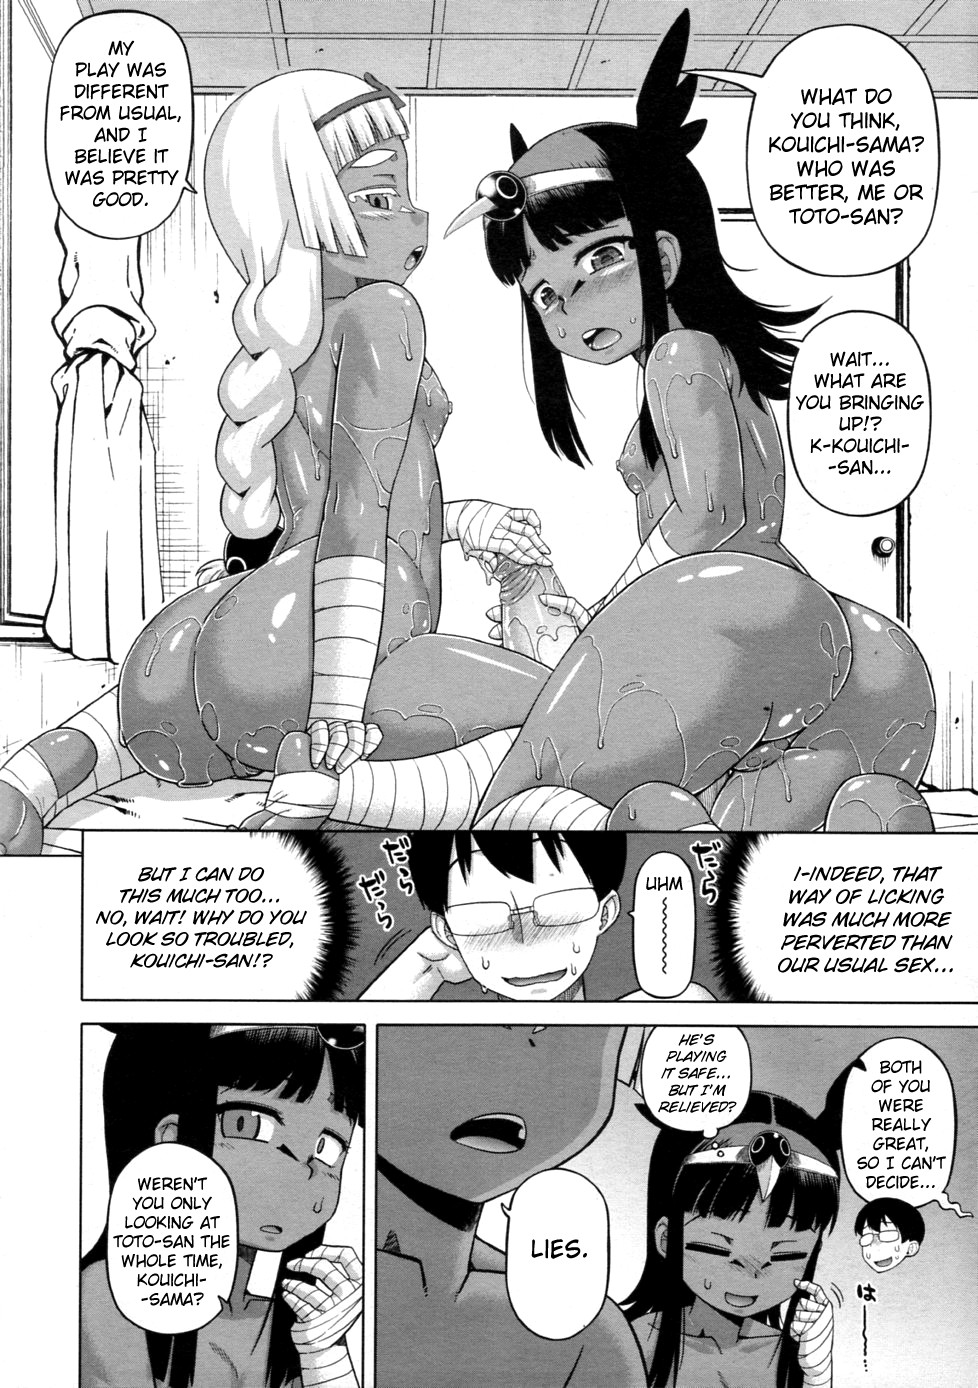 [Takatu] You're Gonna Write that Down in History Too!? Ch. 1-2 (English) {doujin-moe.us} page 26 full